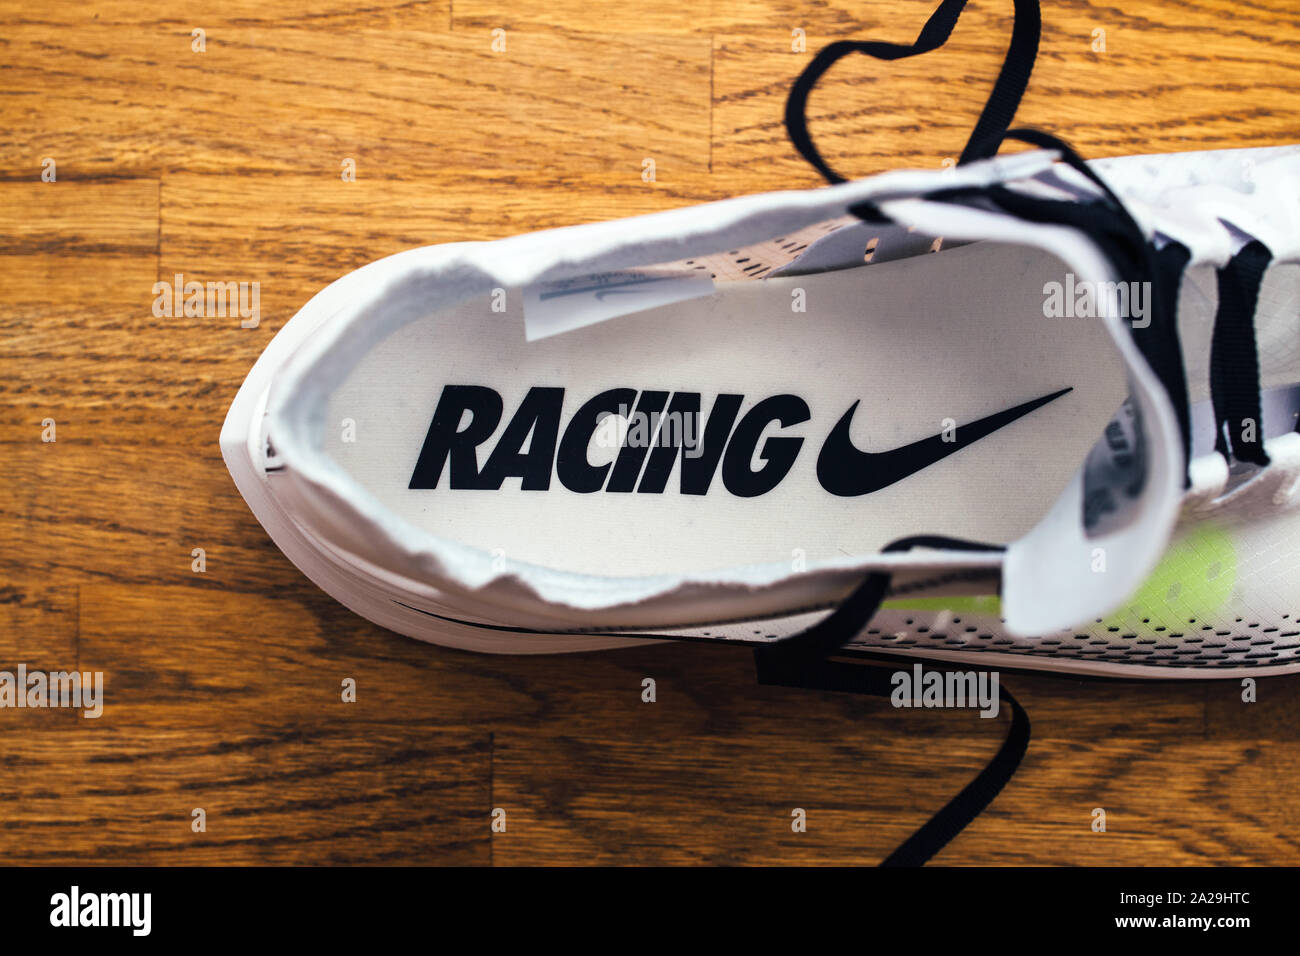 Paris, France - Jul 8, 2019: New professional Nike Zoom Fly SP Fast running  sport shoe on wooden floor with Racing inscription on the sole Stock Photo  - Alamy